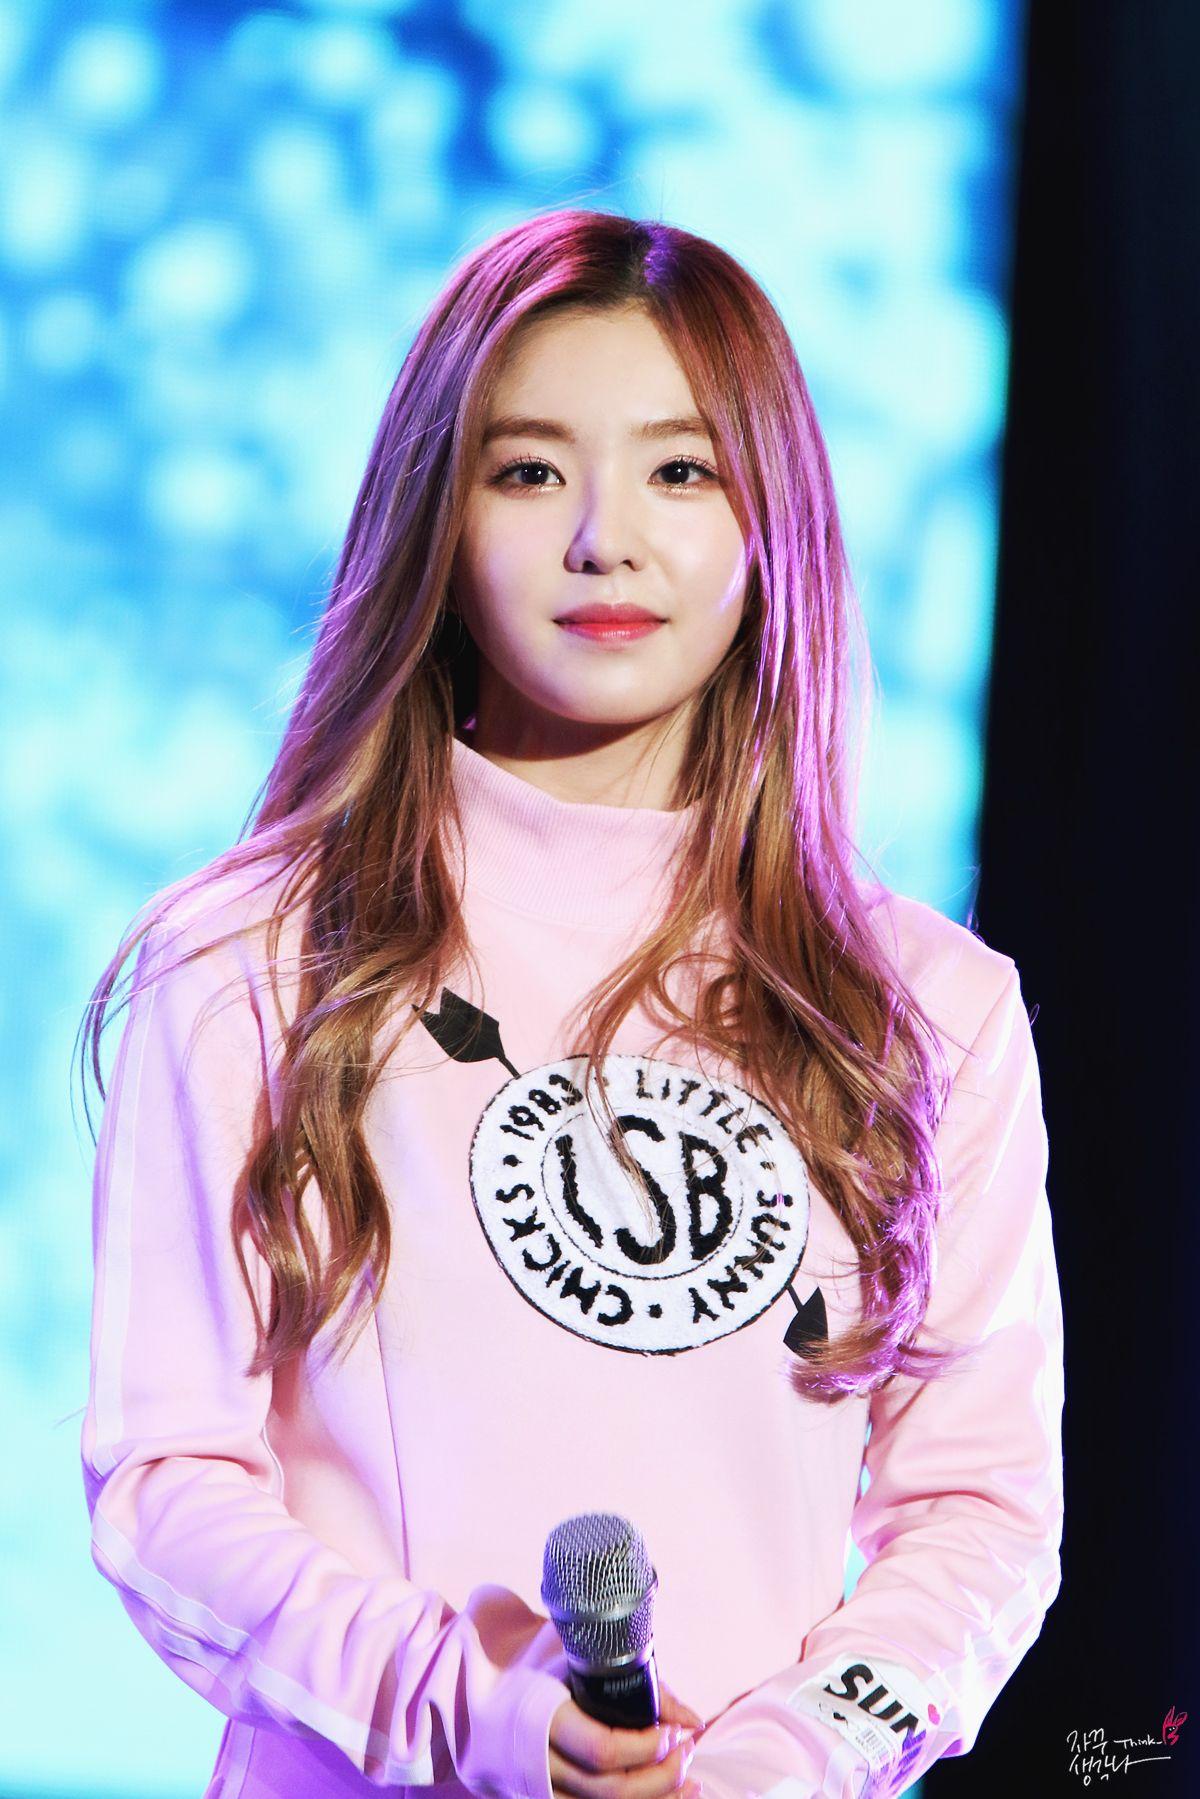 Irene Android IPhone Wallpaper KPOP Image Board